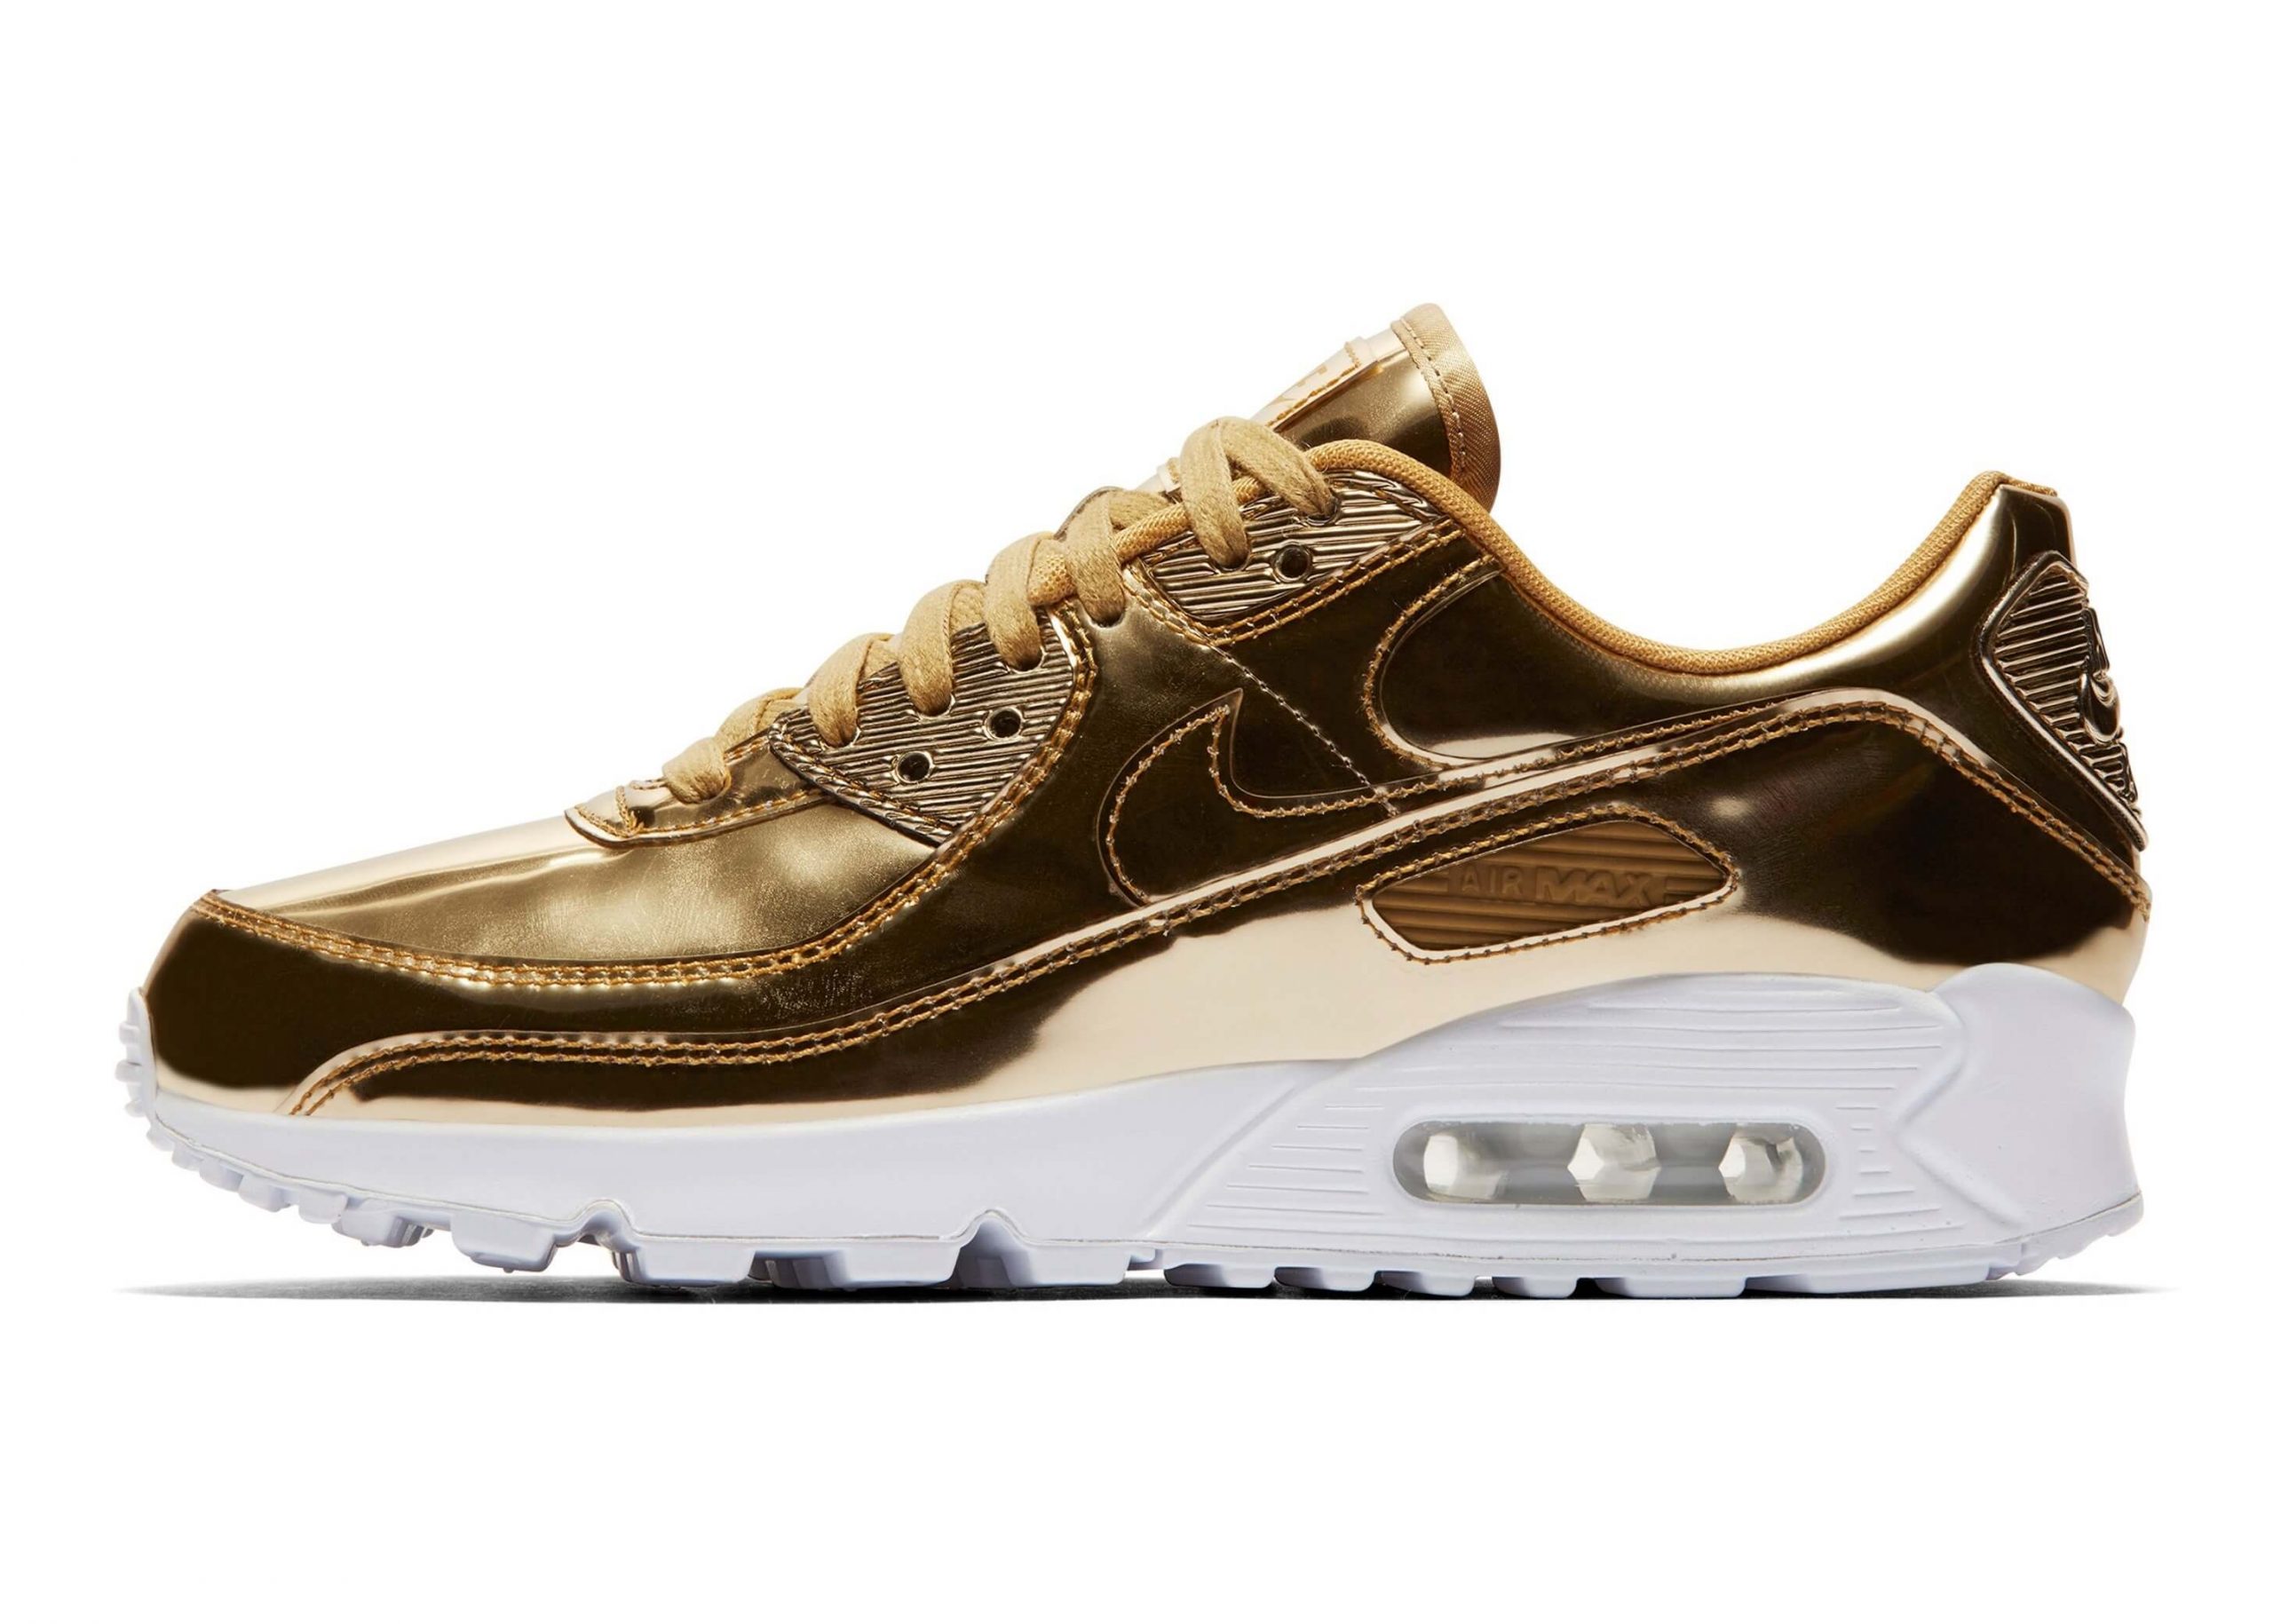 nikes-latest-releases-for-air-max-day 